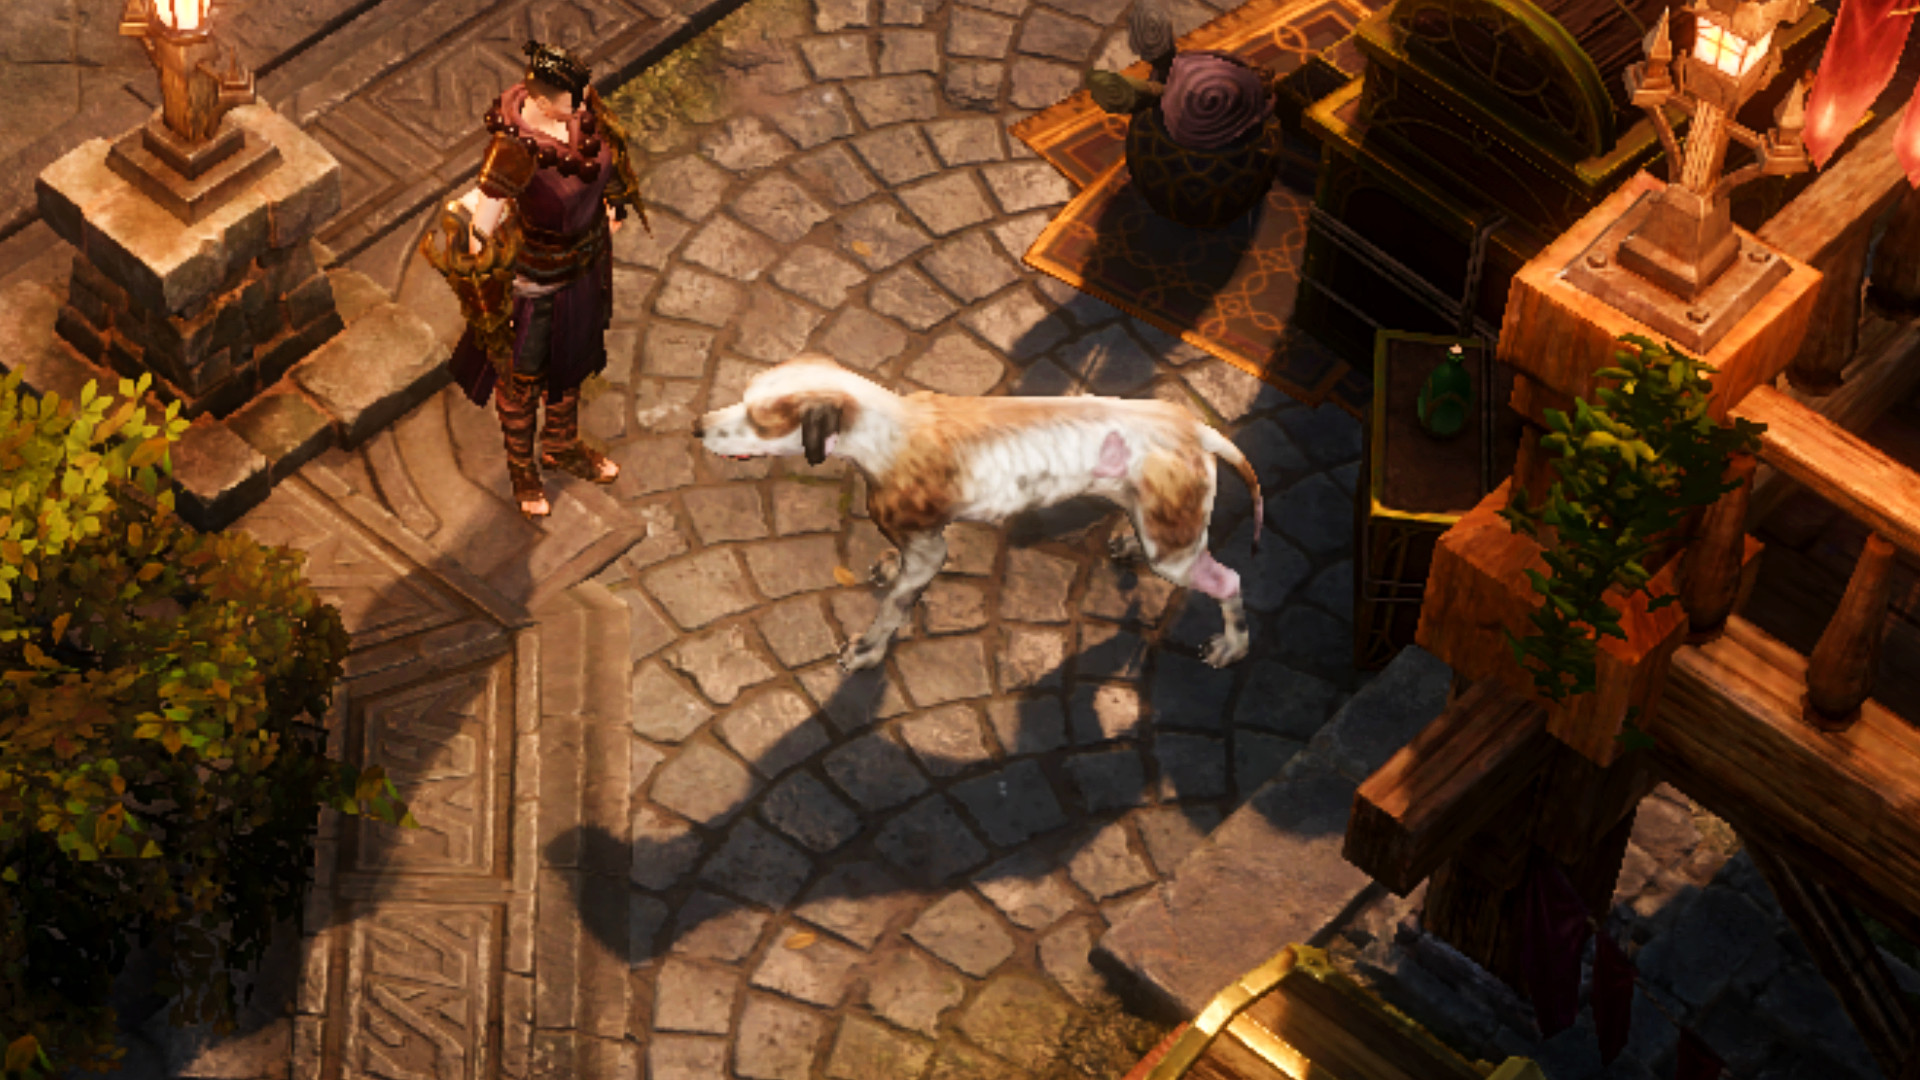 Diablo Immortal players just want to pet a dog